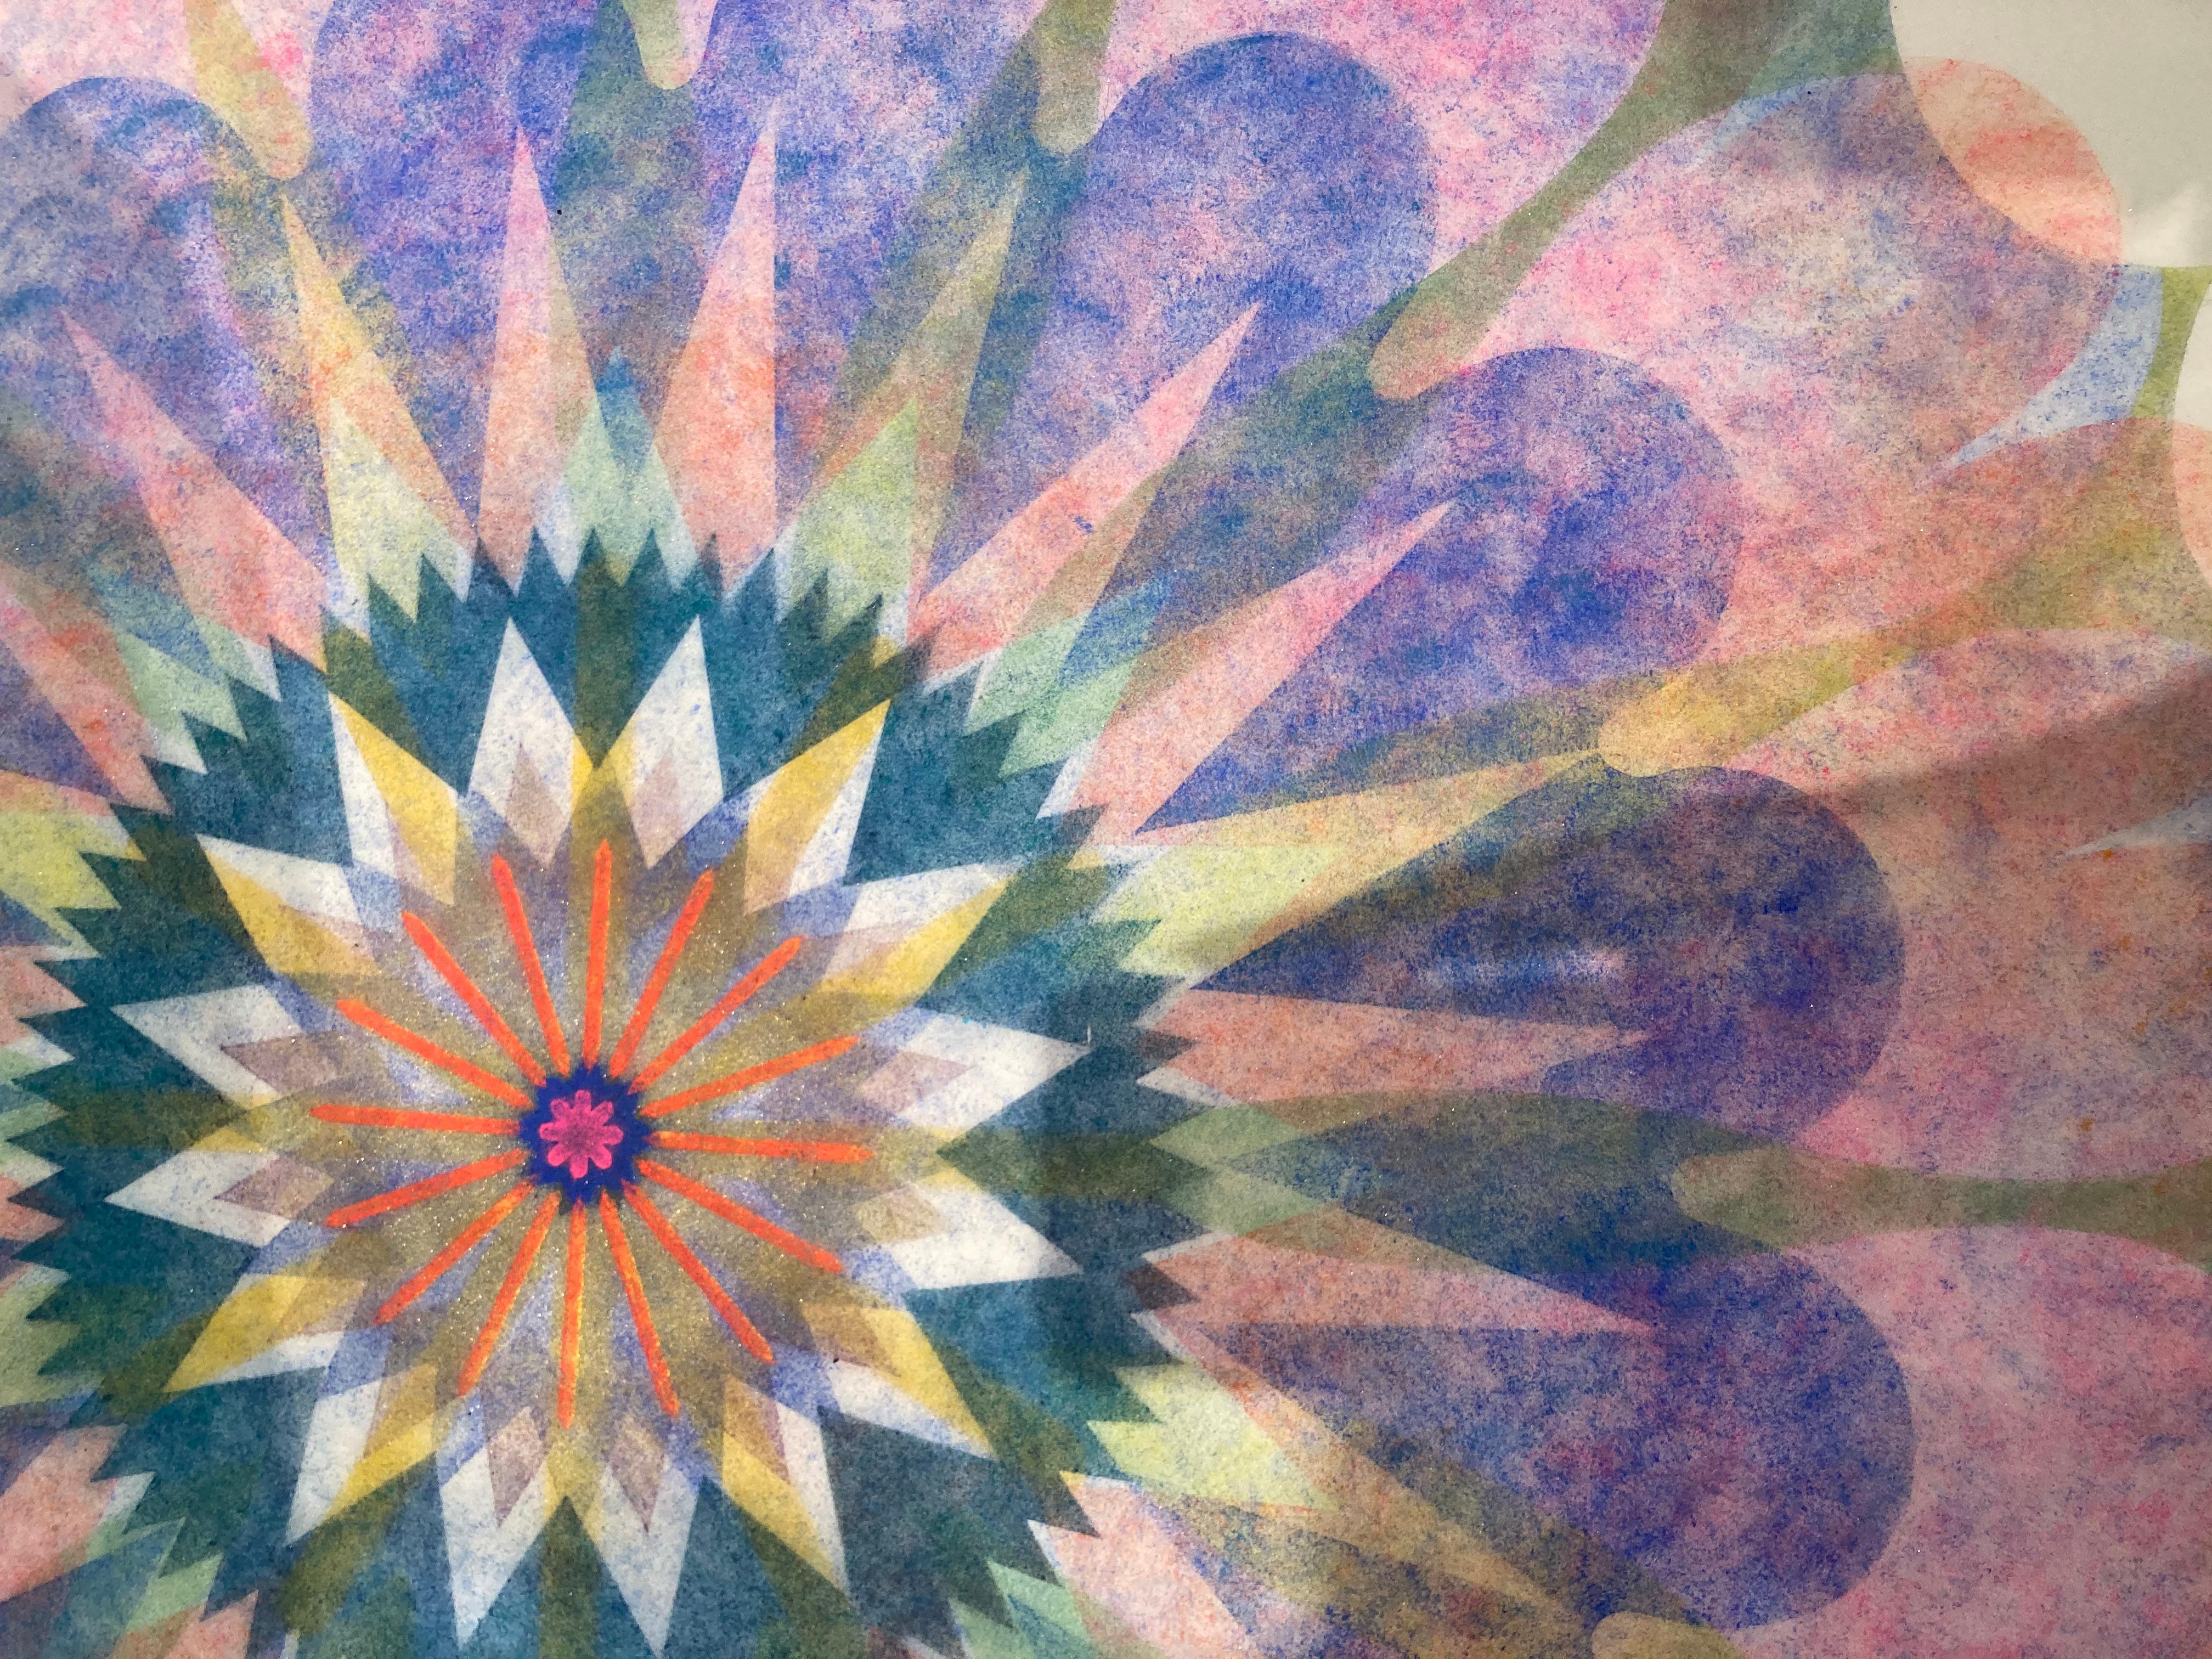 Poptic 13, Flower Mandala, Light Pink, Blue, Golden Yellow, Red, Green - Gray Abstract Drawing by Mary Judge